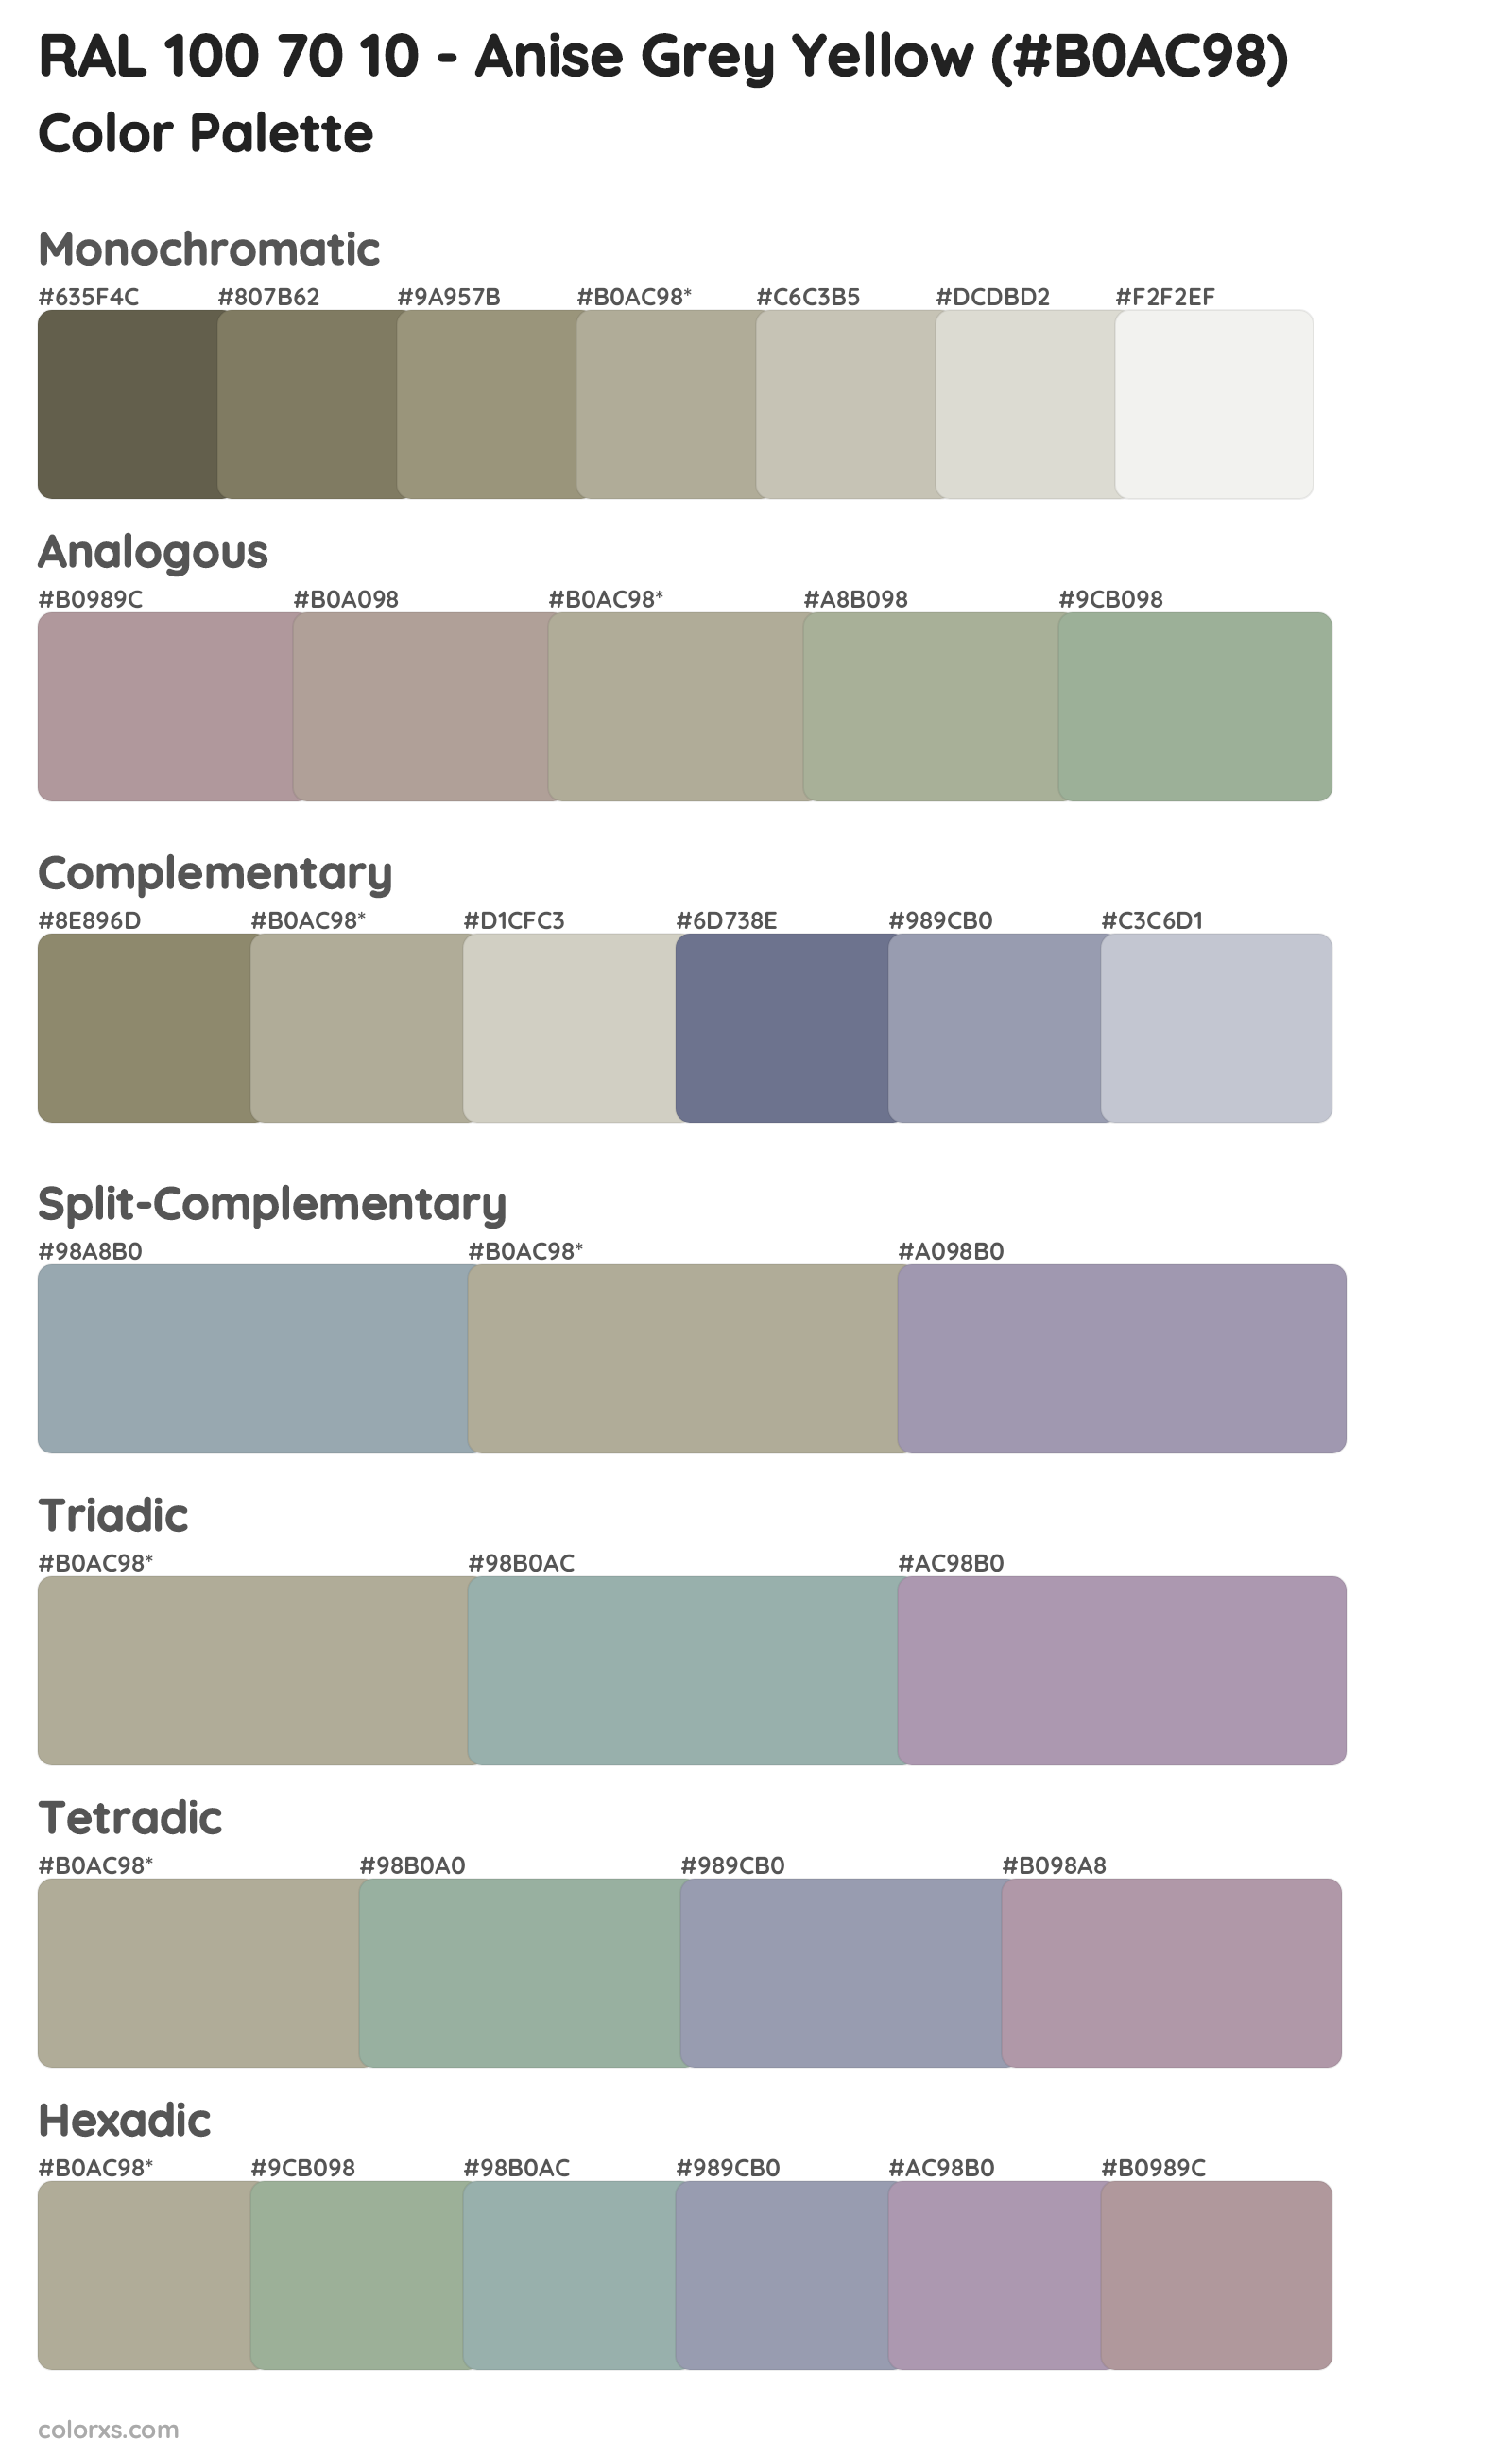 RAL 100 70 10 - Anise Grey Yellow Color Scheme Palettes